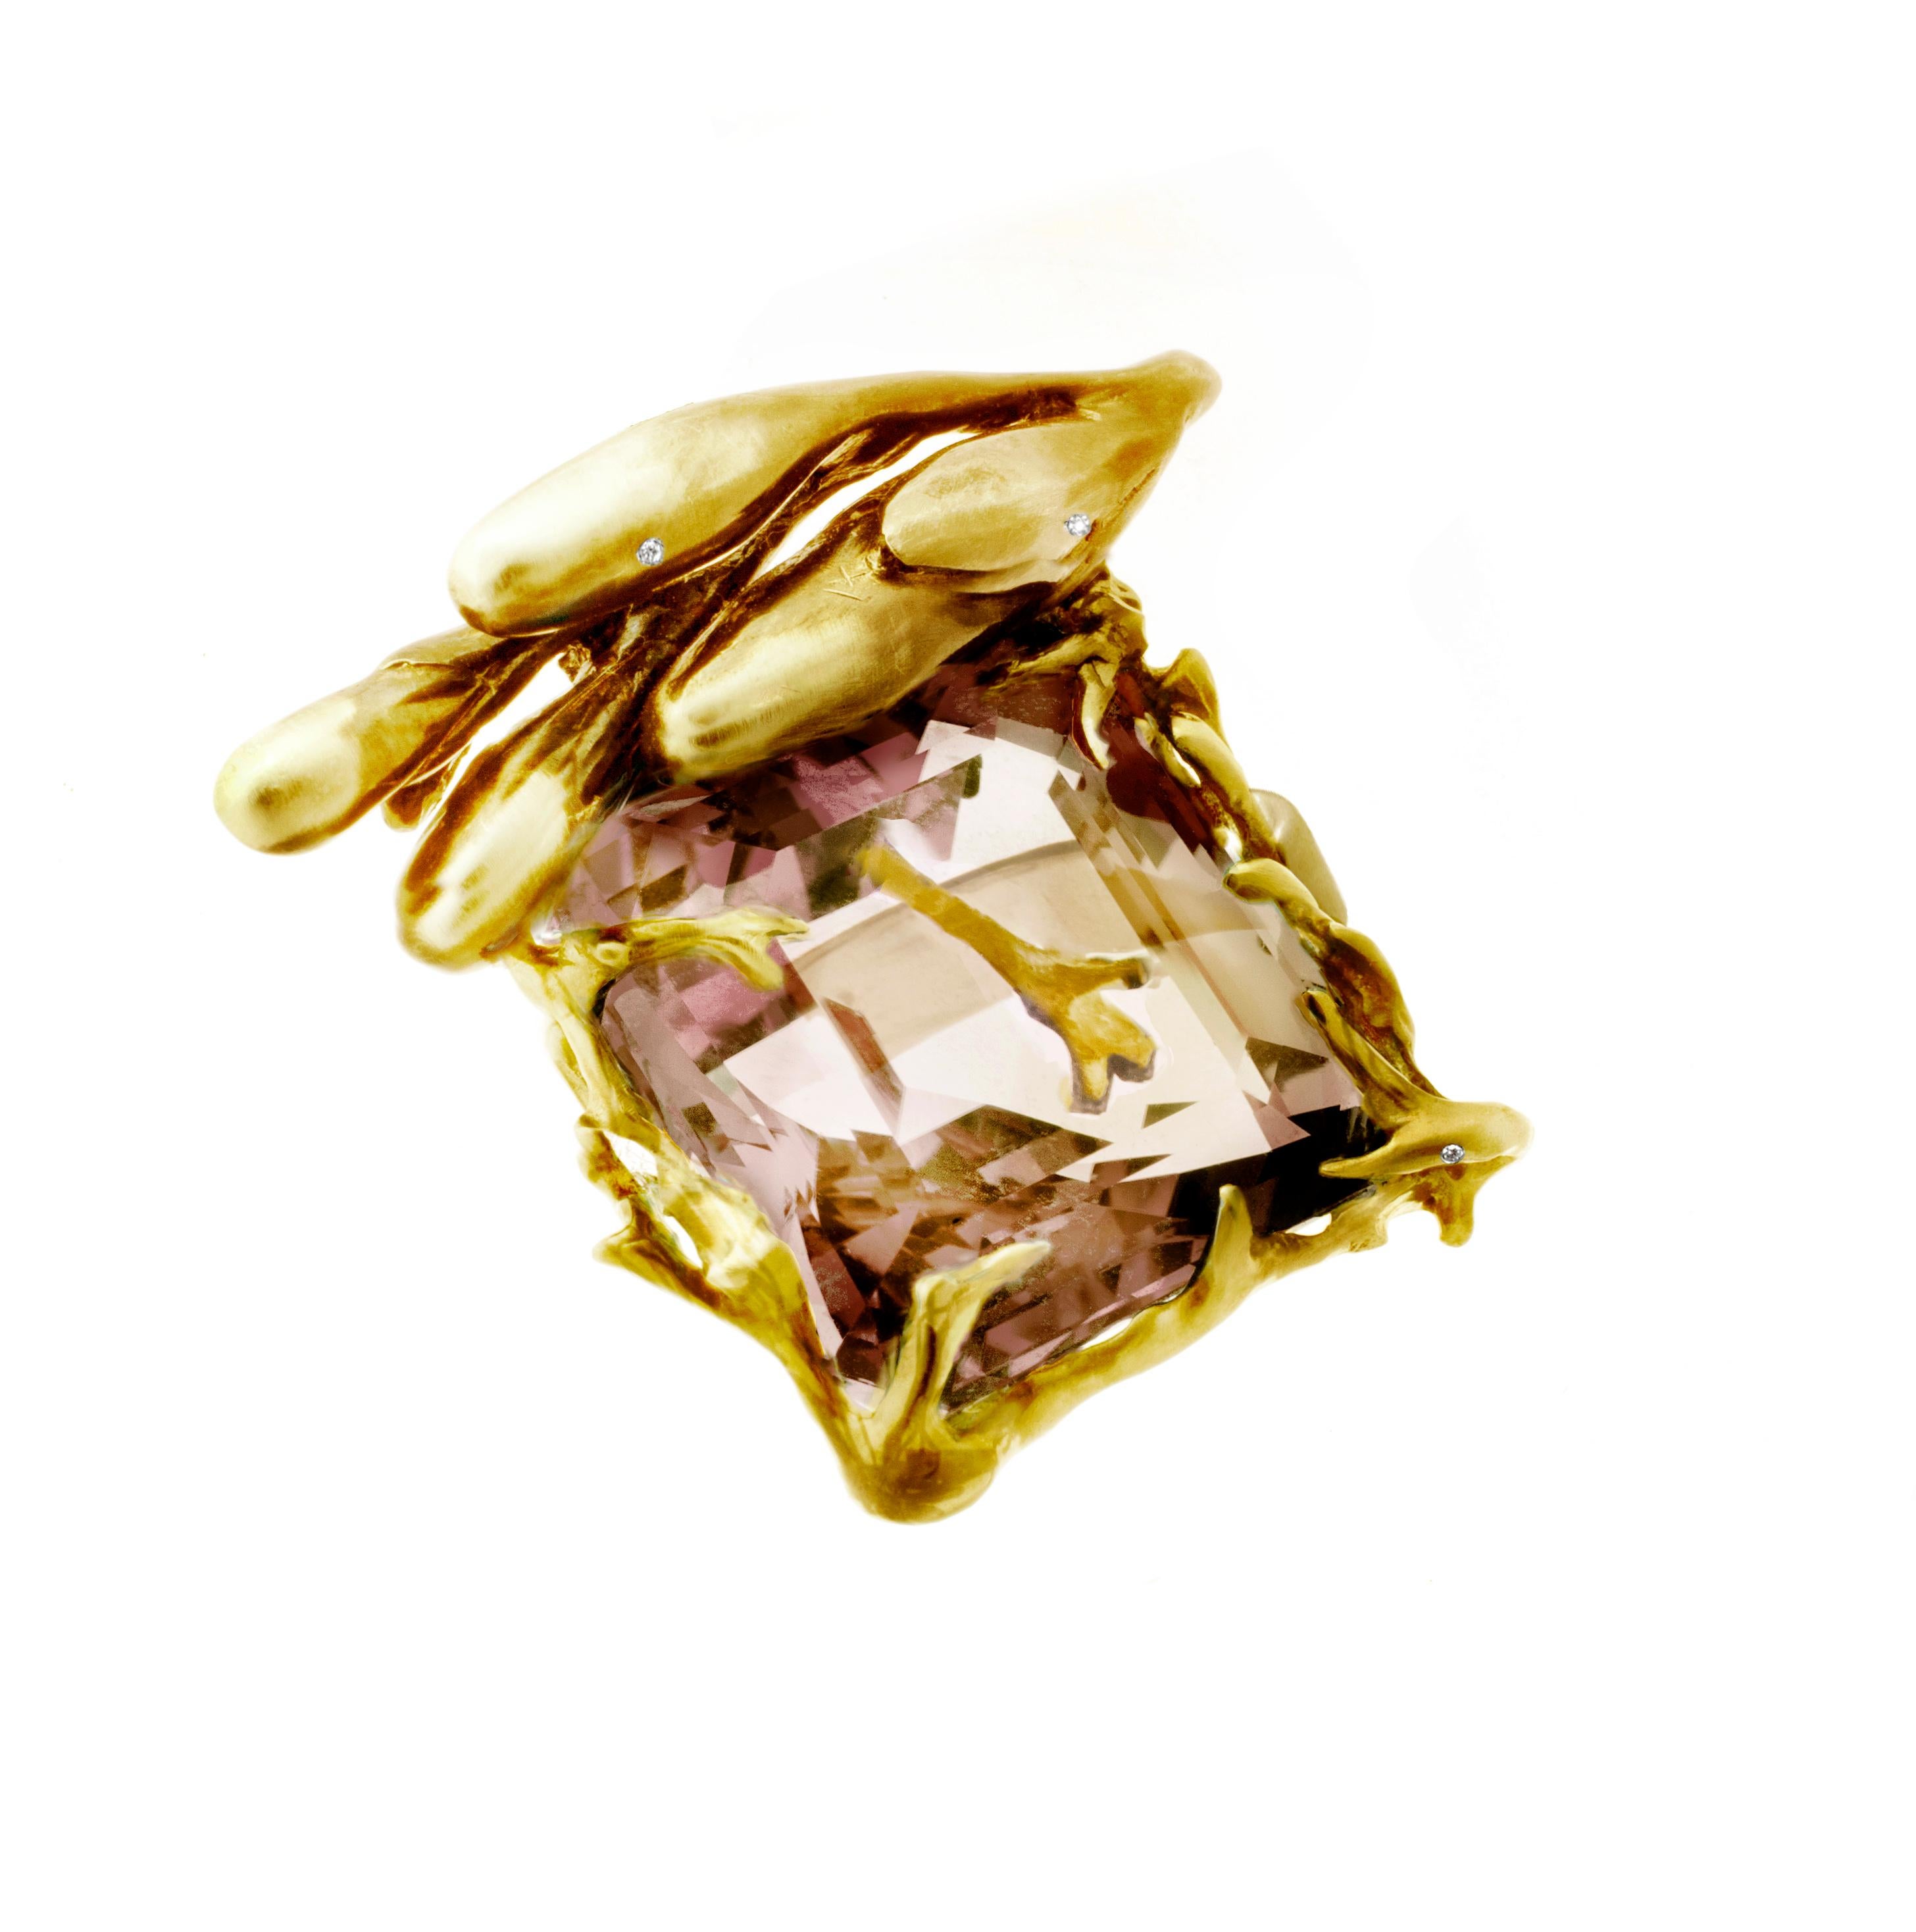 This is a Fairy Tale ring made of 18 karat yellow gold with a large Kunzite gemstone in a soft peach powder color. The ring has 7 diamonds encrusted in it and was featured in a published issue of Vogue UA. It was designed by artist and oil painter